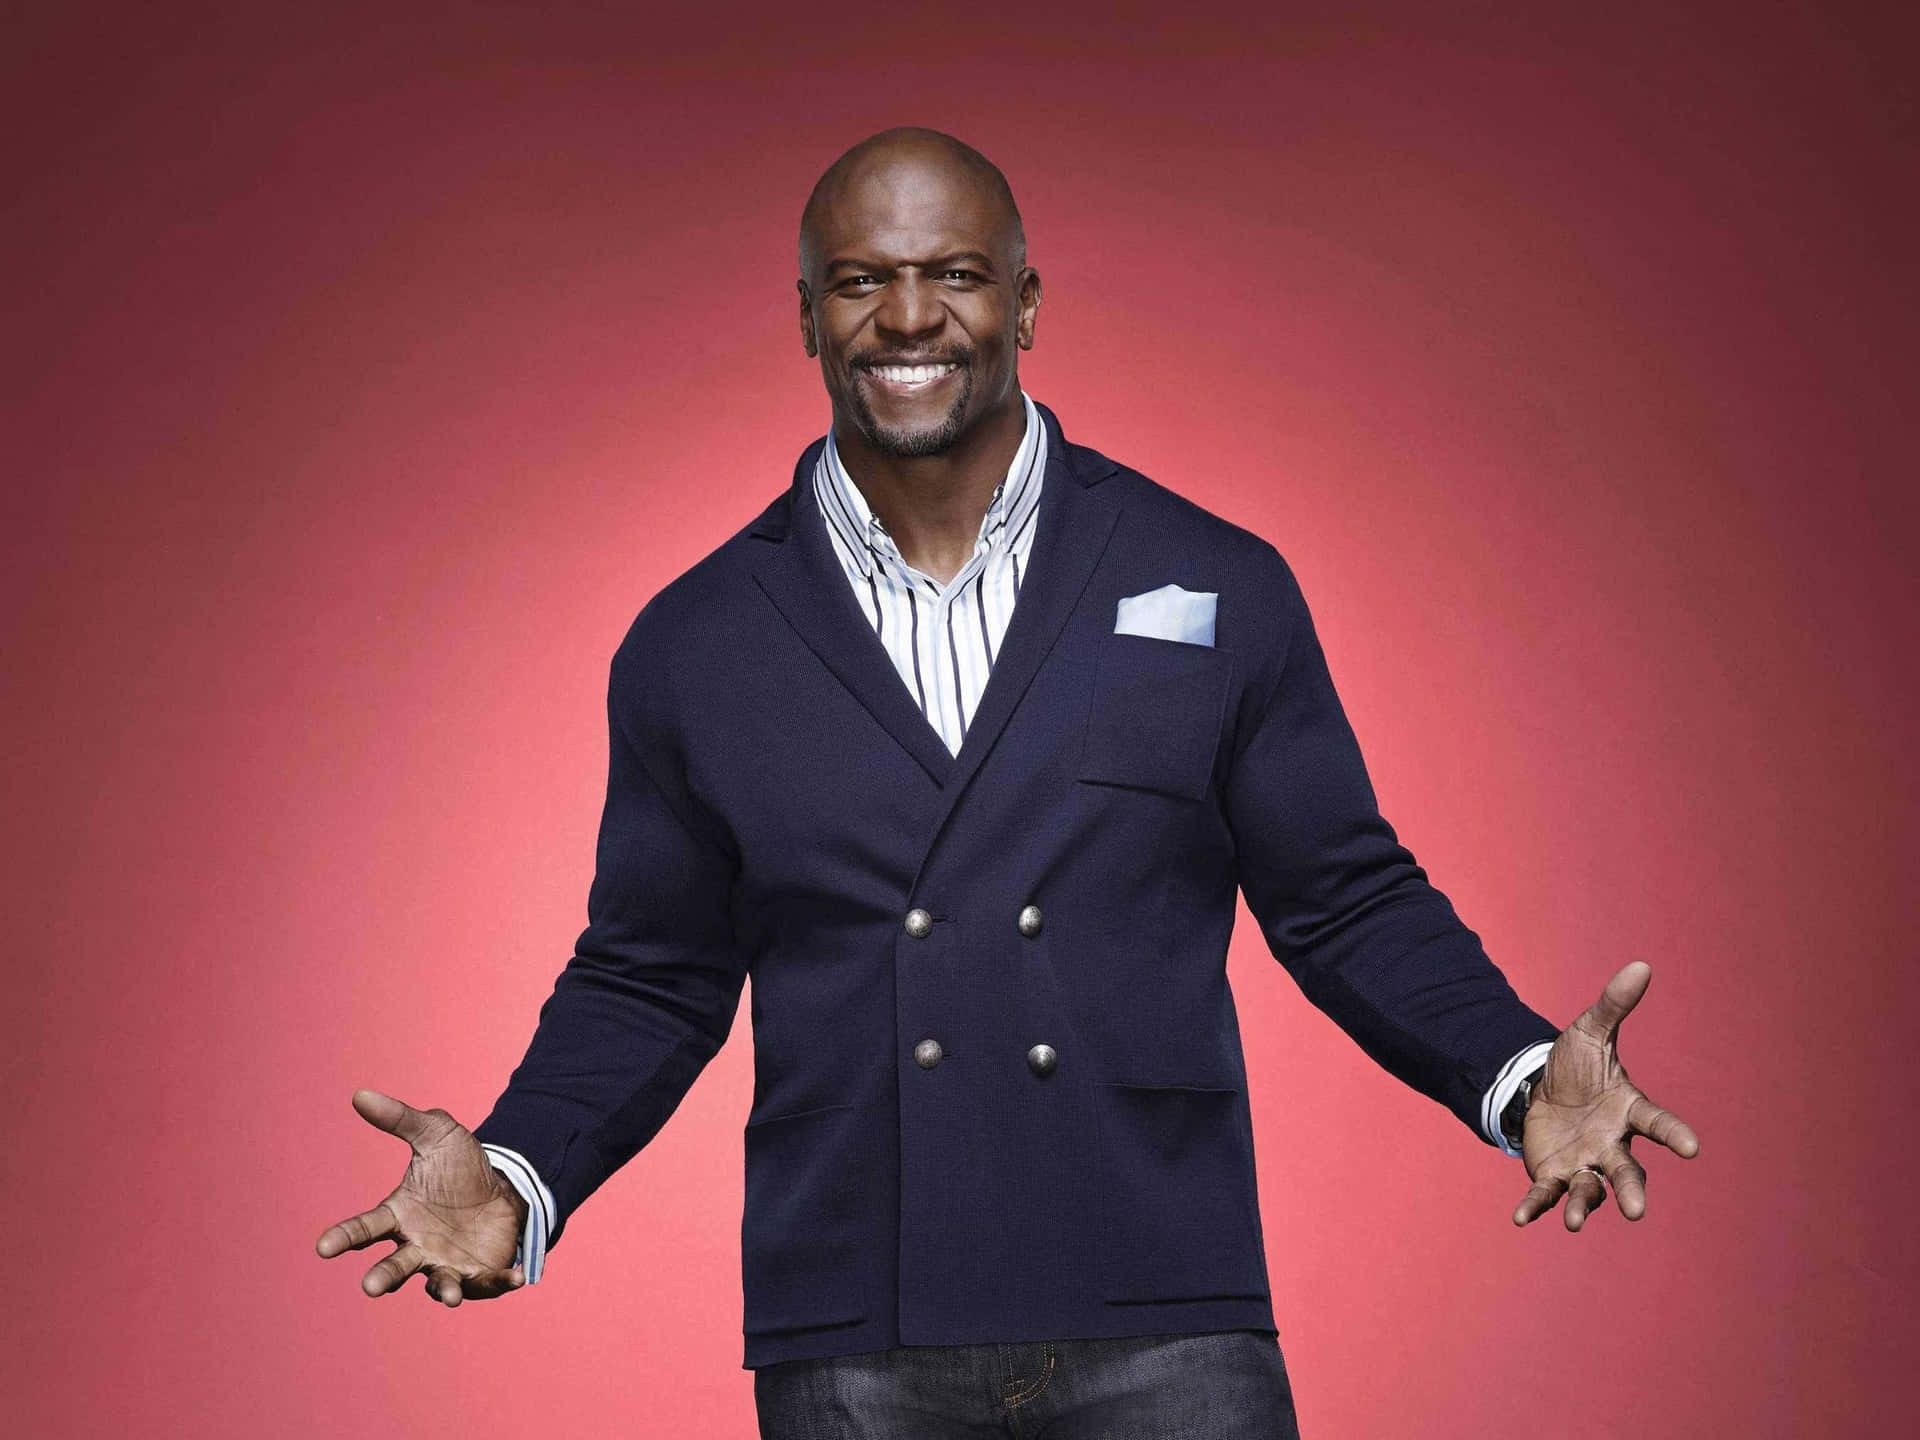 The beloved actor, comedian and former football player Terry Crews in his signature pose Wallpaper